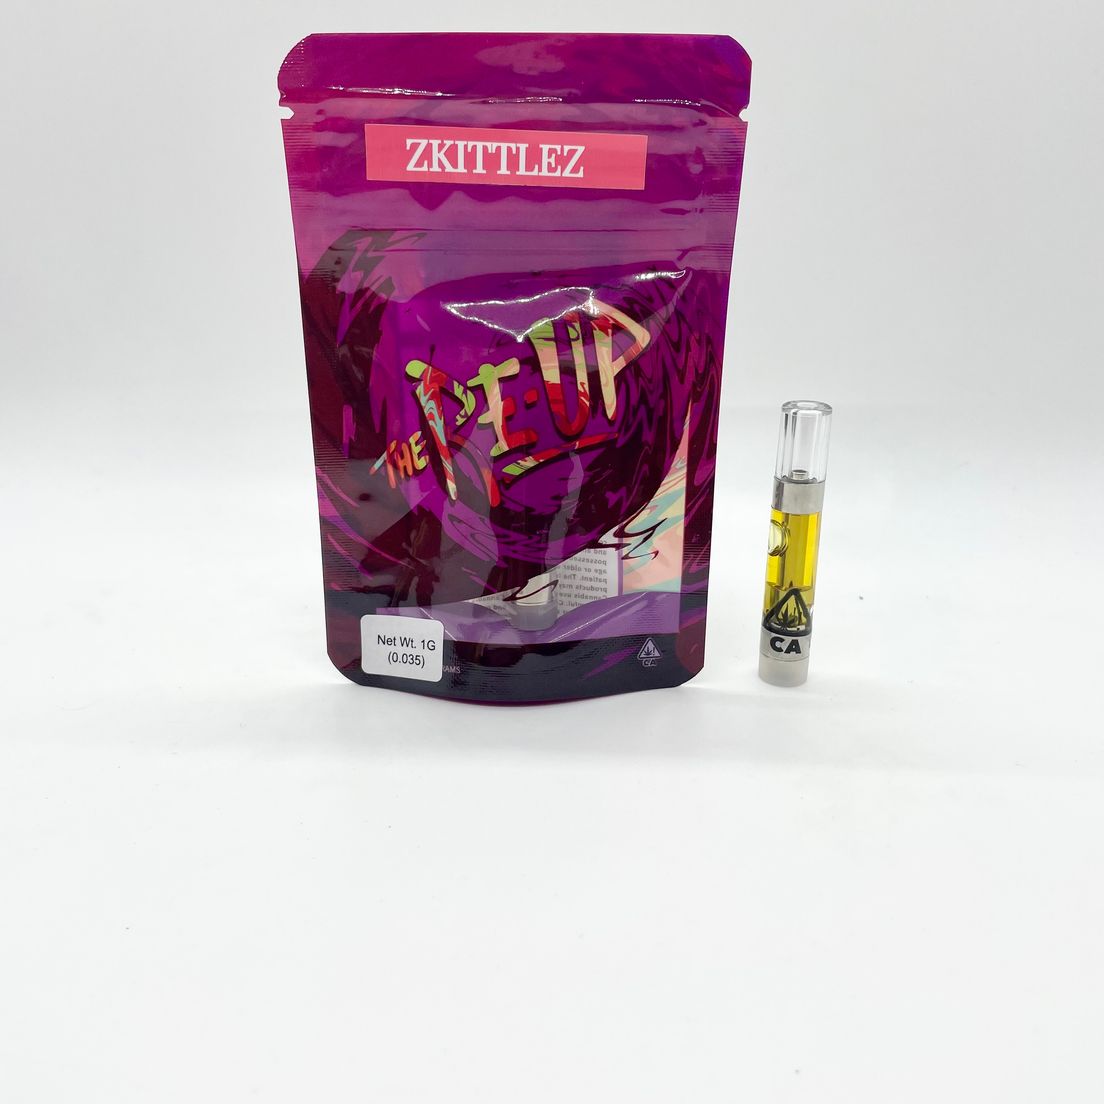 *BLOWOUT DEAL $39 1g Zkittlez (Indica) CCELL Cartridge - The Re-Up